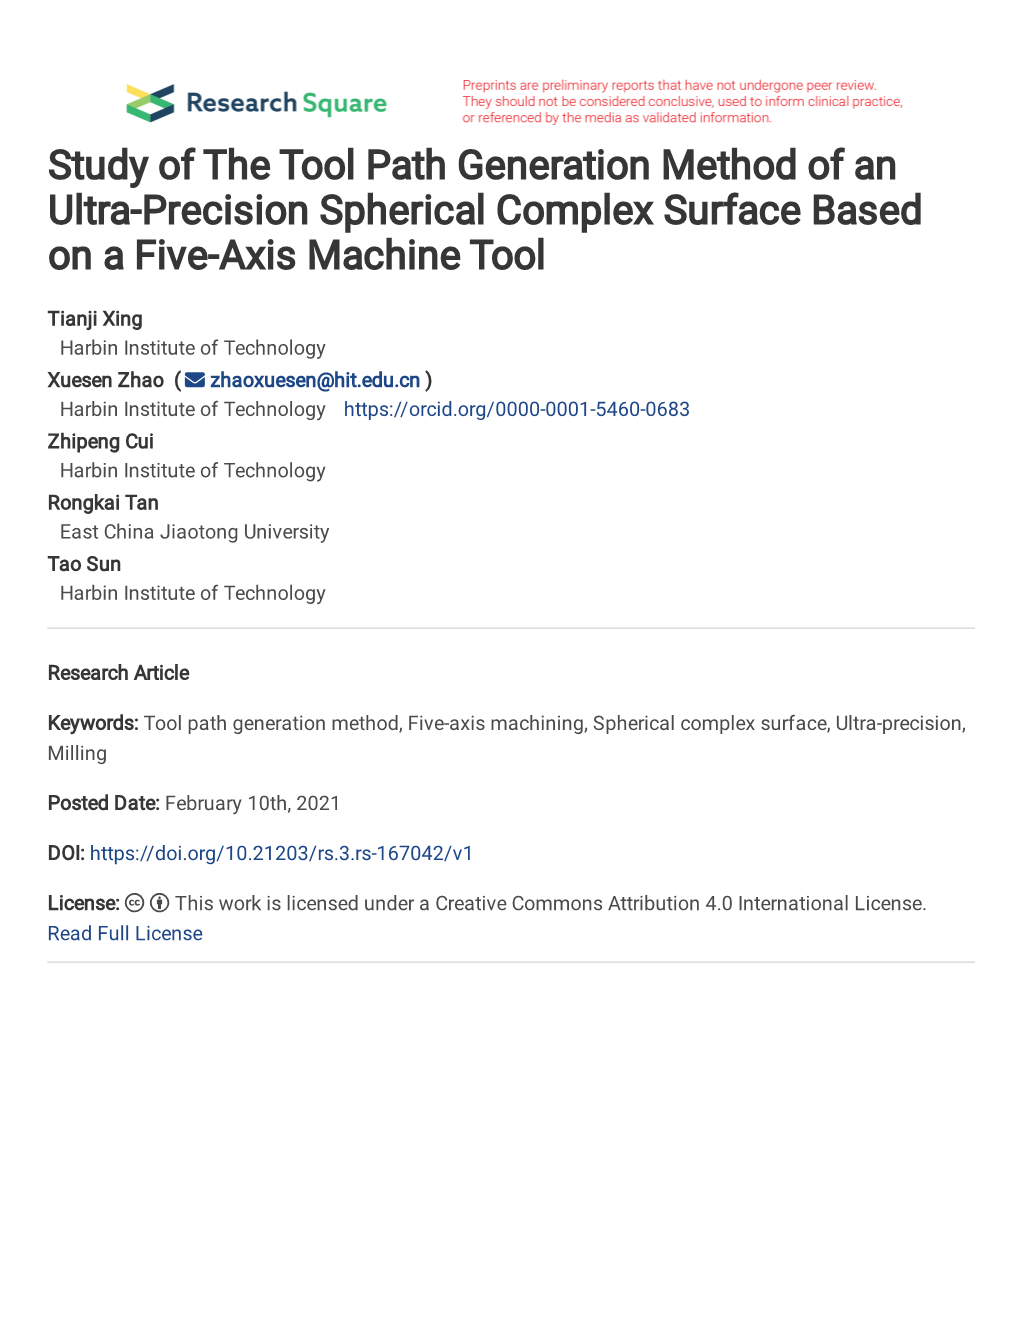 Study of the Tool Path Generation Method of an Ultra-Precision Spherical Complex Surface Based on a Five-Axis Machine Tool Keywo